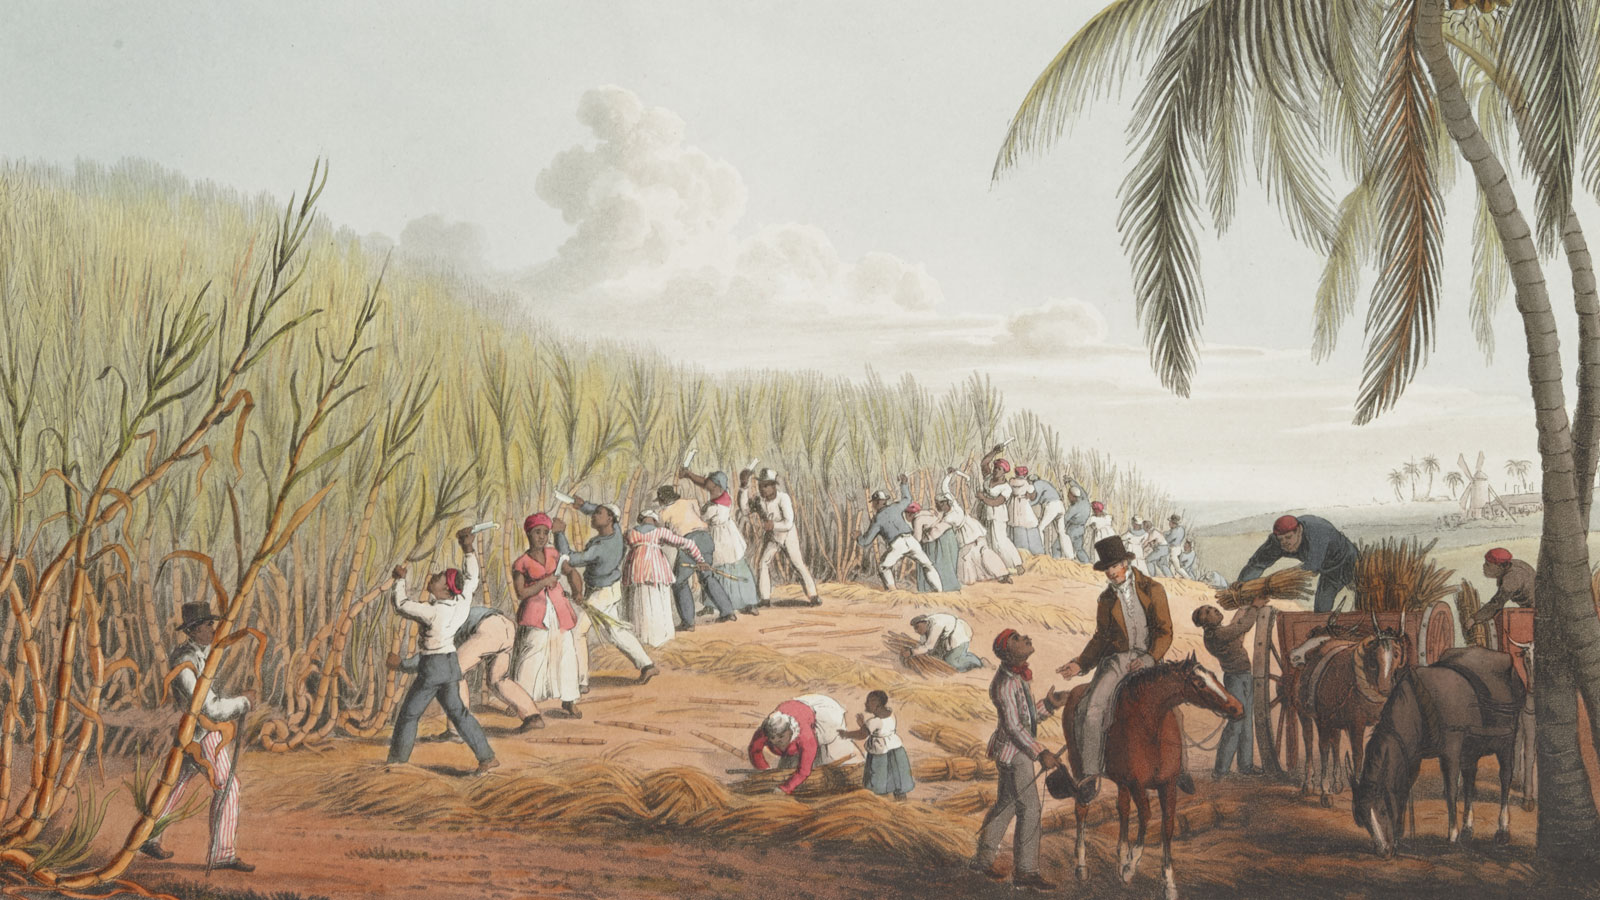 An-introduction-to-the-Caribbean-empire-and-slavery-banner-crop.jpg